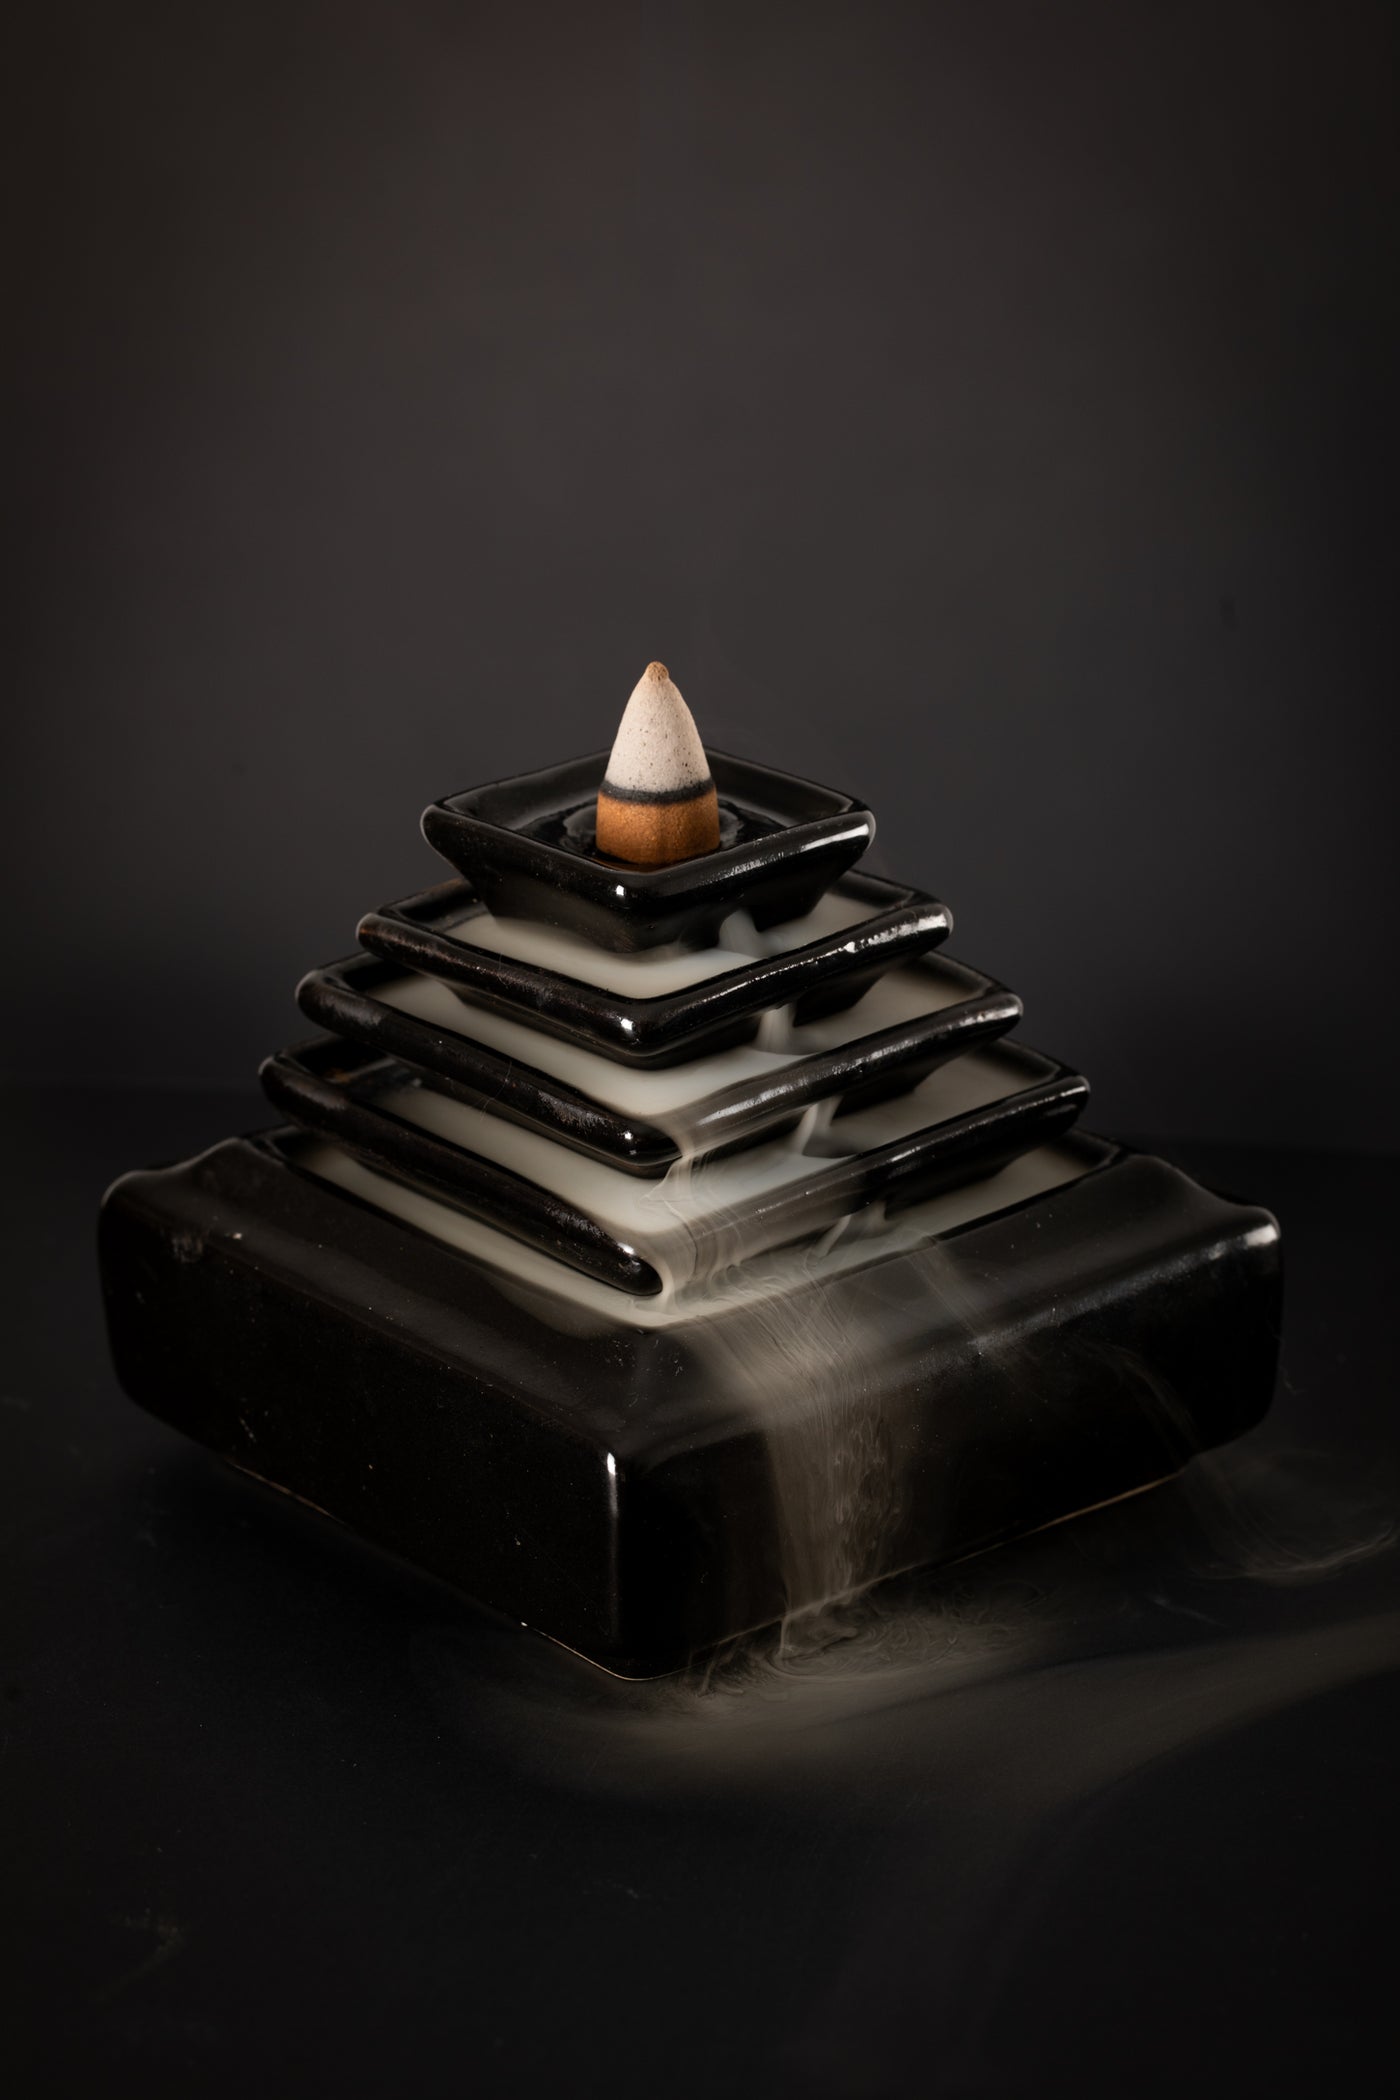 Incense Waterfall: Incense Burners and Incense Holders